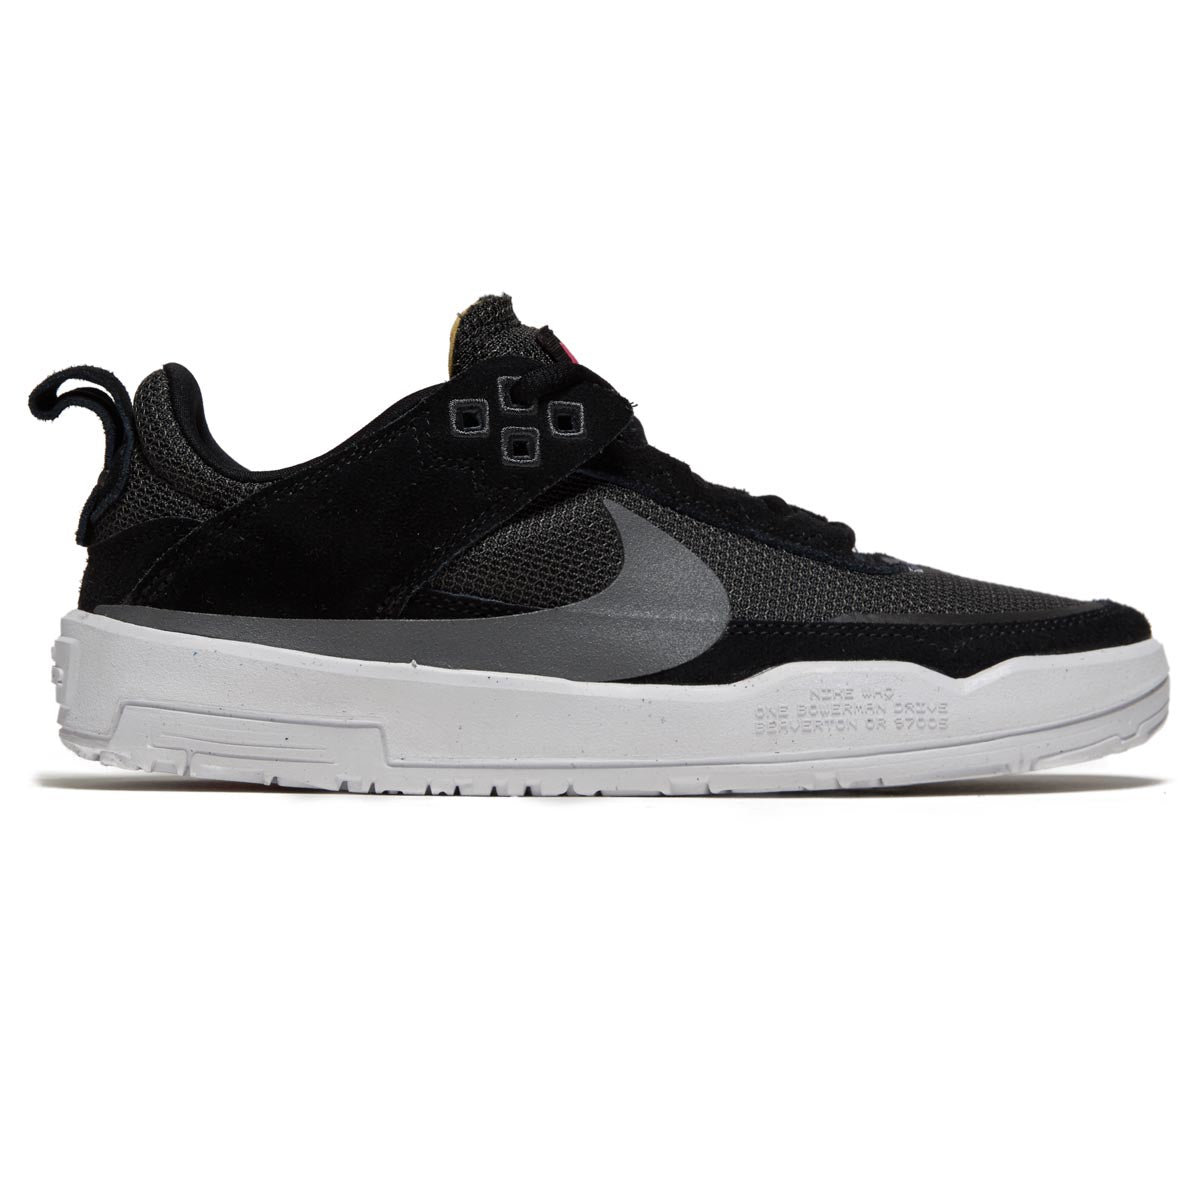 Nike SB Youth Burnside Shoes - Black/Cool Grey/Anthracite/Alchemy Pink image 1